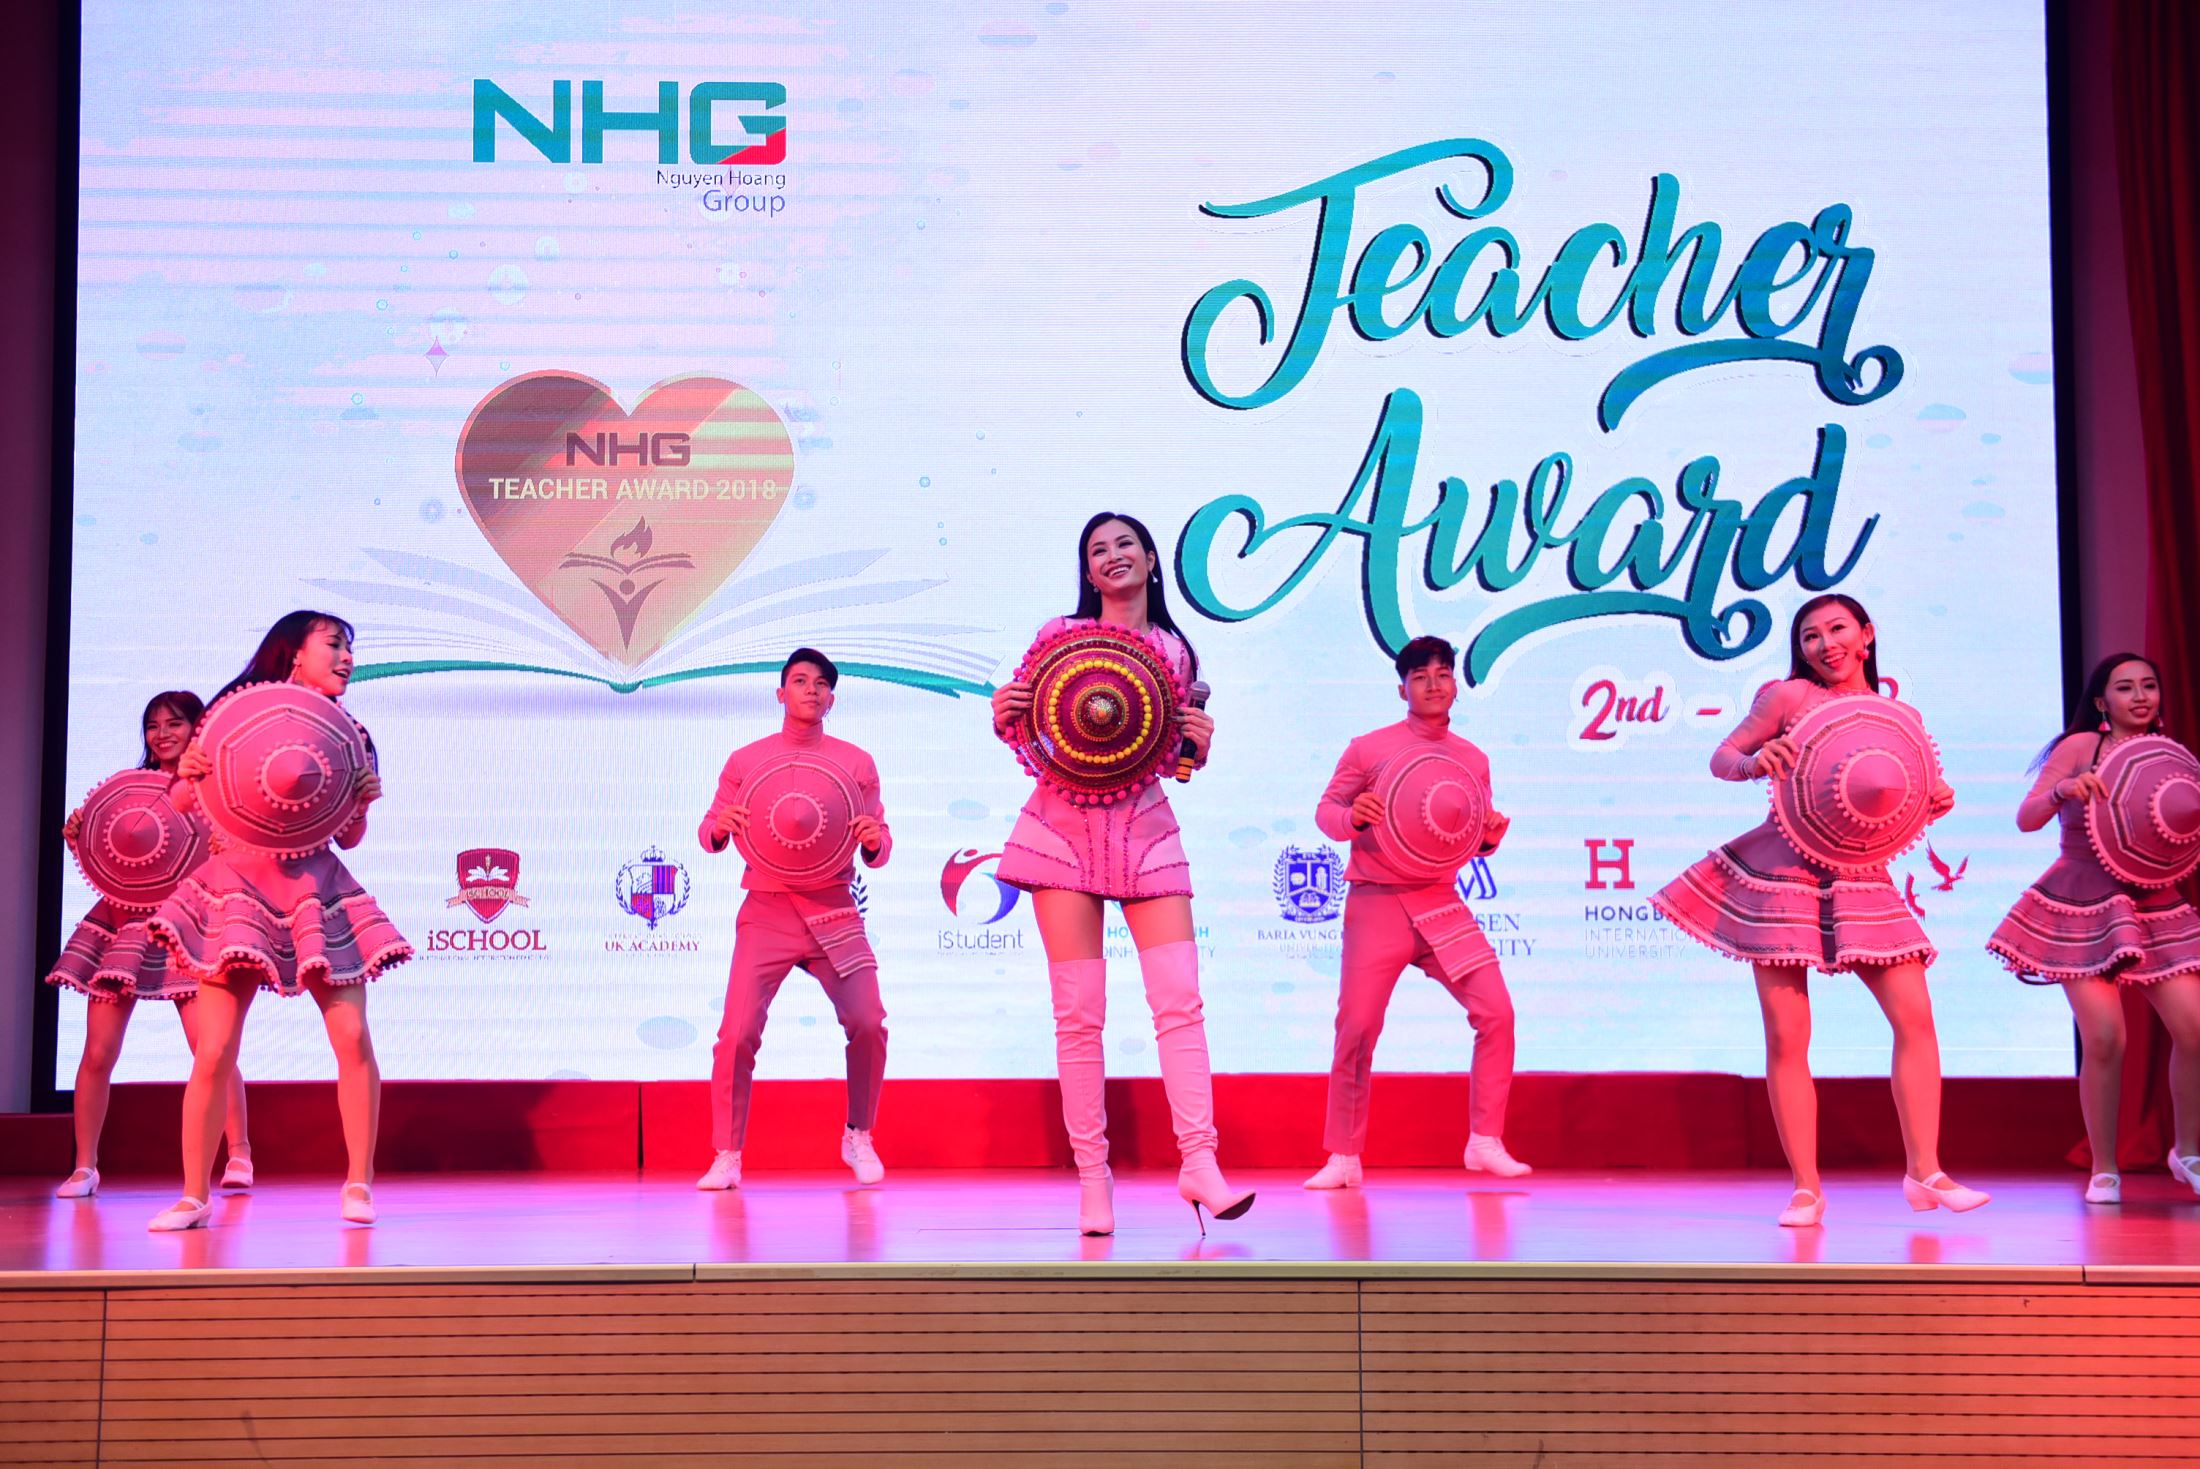 Singer Dong Nhi also congratulates on the Vietnam Teacher’s Day with 2 lovely songs about the teacher – student relationship and the school age